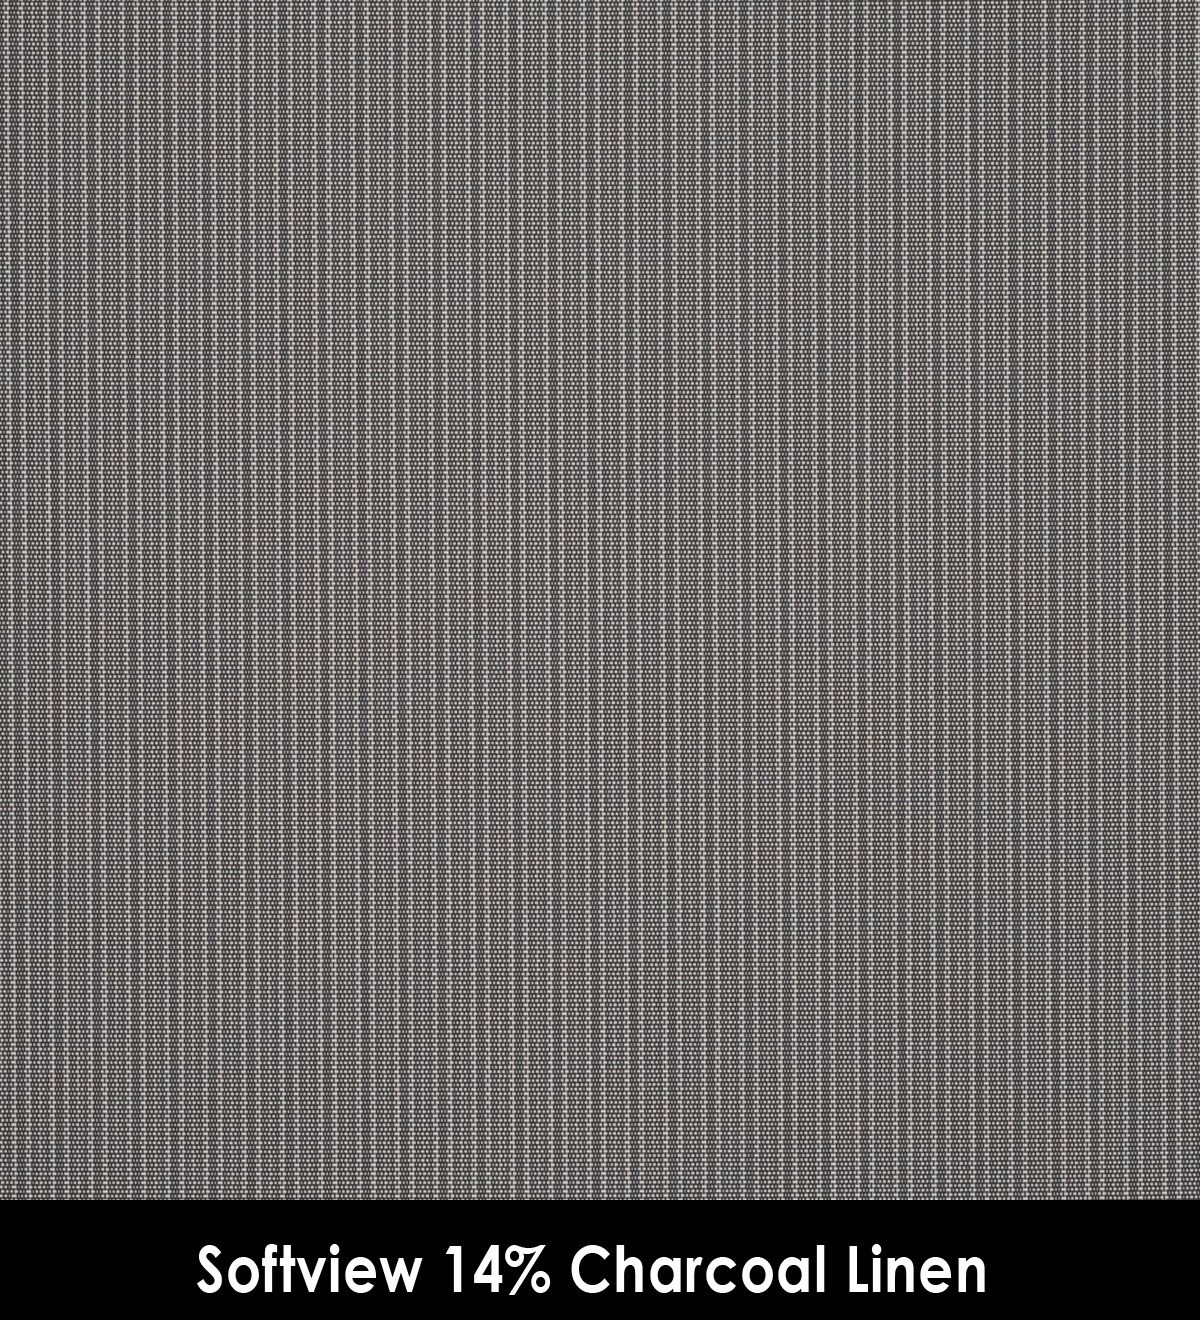 Softview_14_Charcoal_Linen